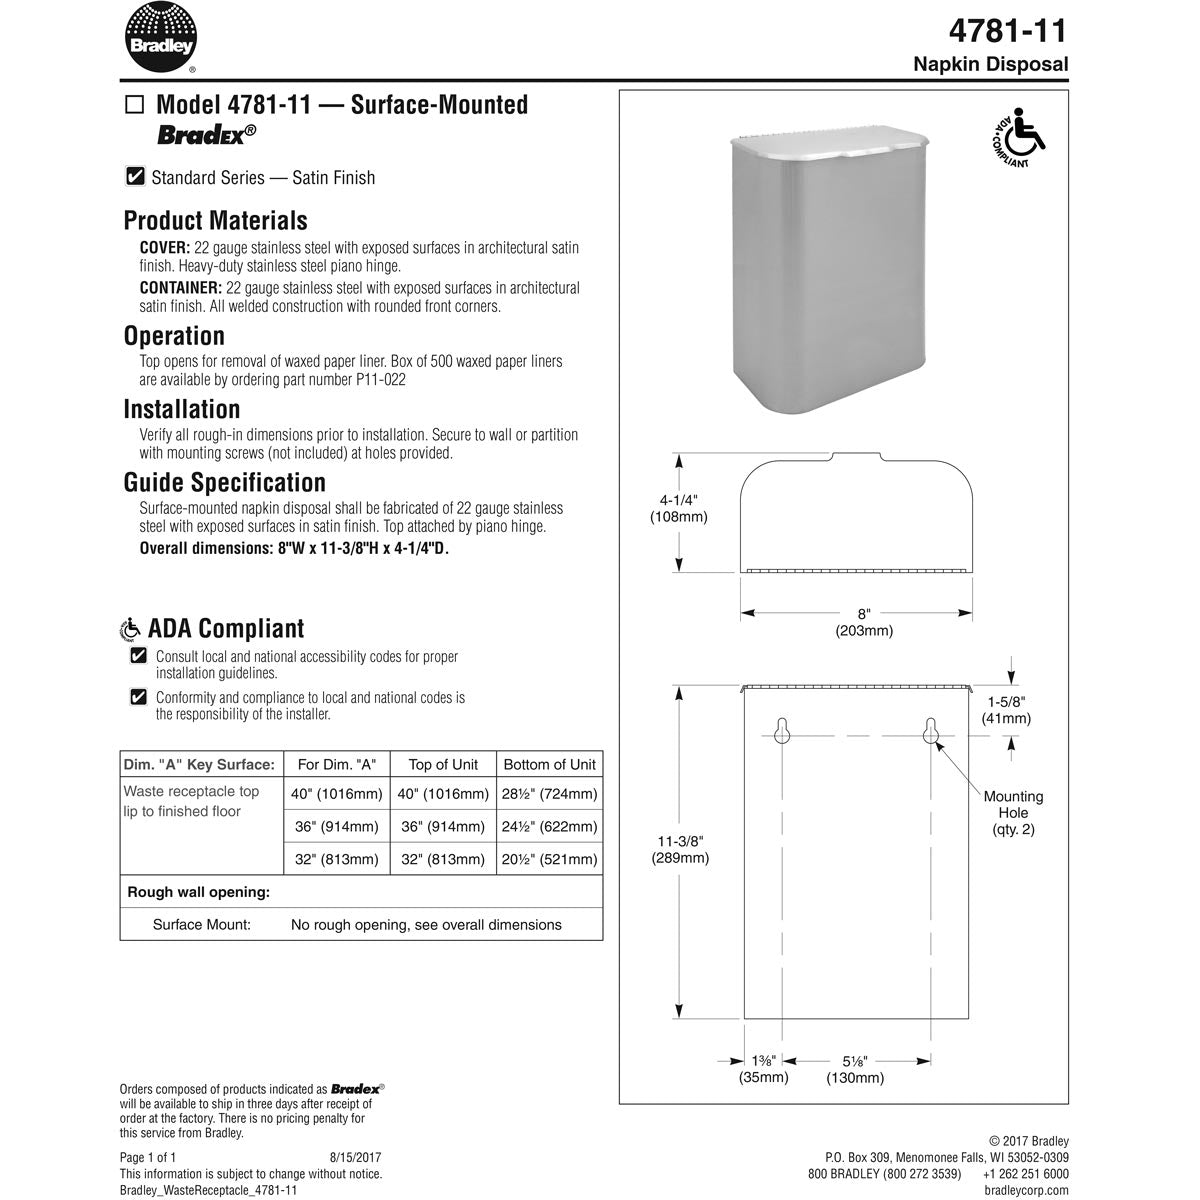 Bradley BX-4781-11 Commercial Restroom Sanitary Napkin Disposal, Surface-Mounted, Stainless Steel